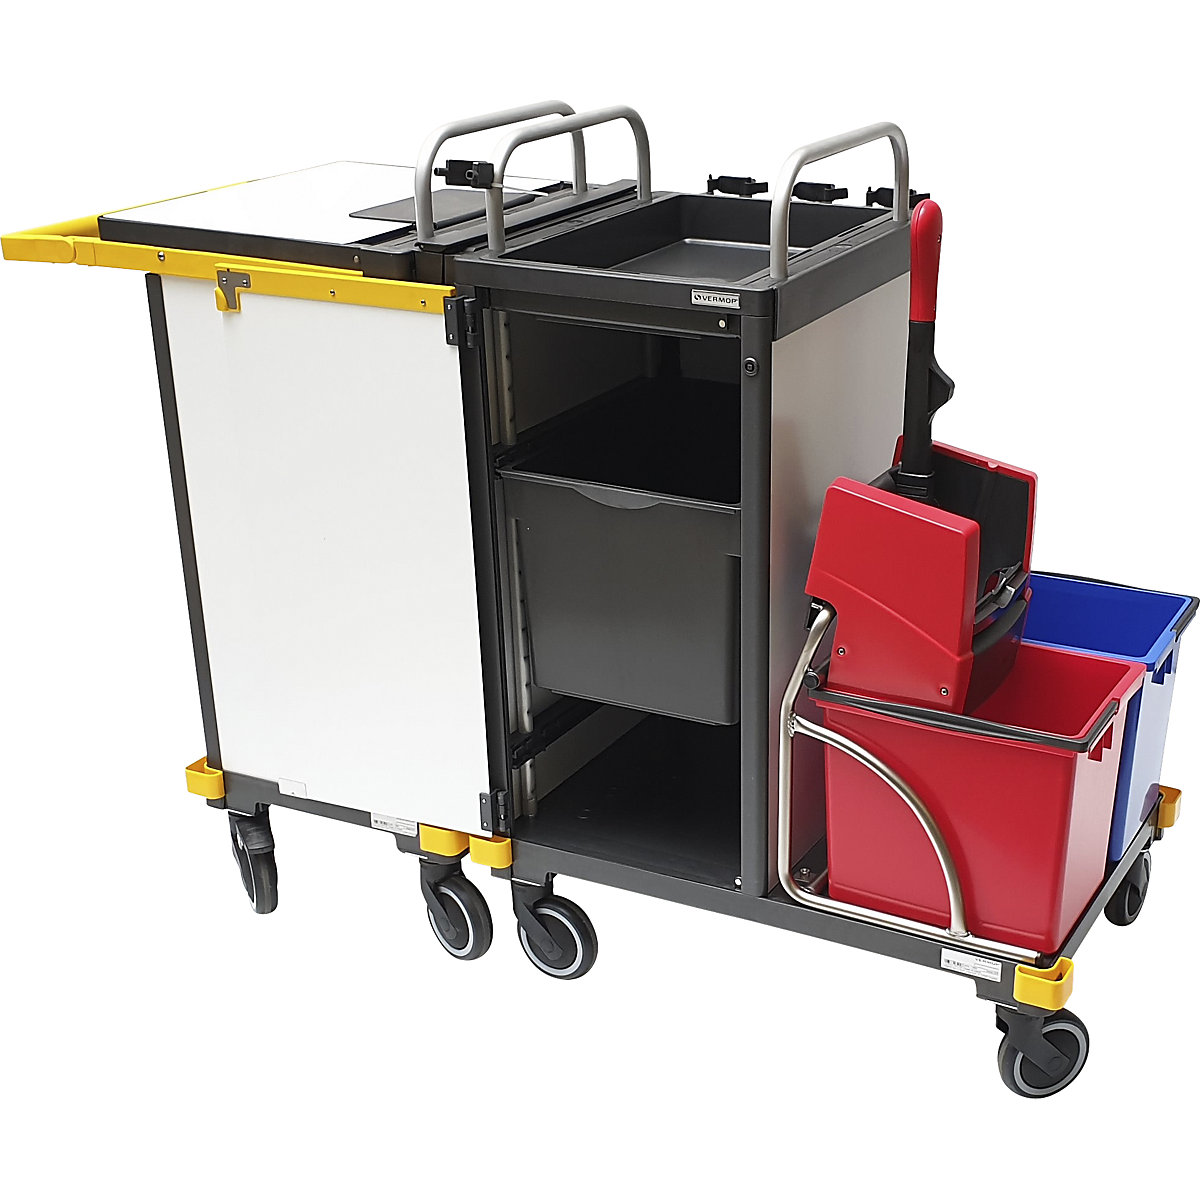 EQUIPE cleaning trolley – Vermop